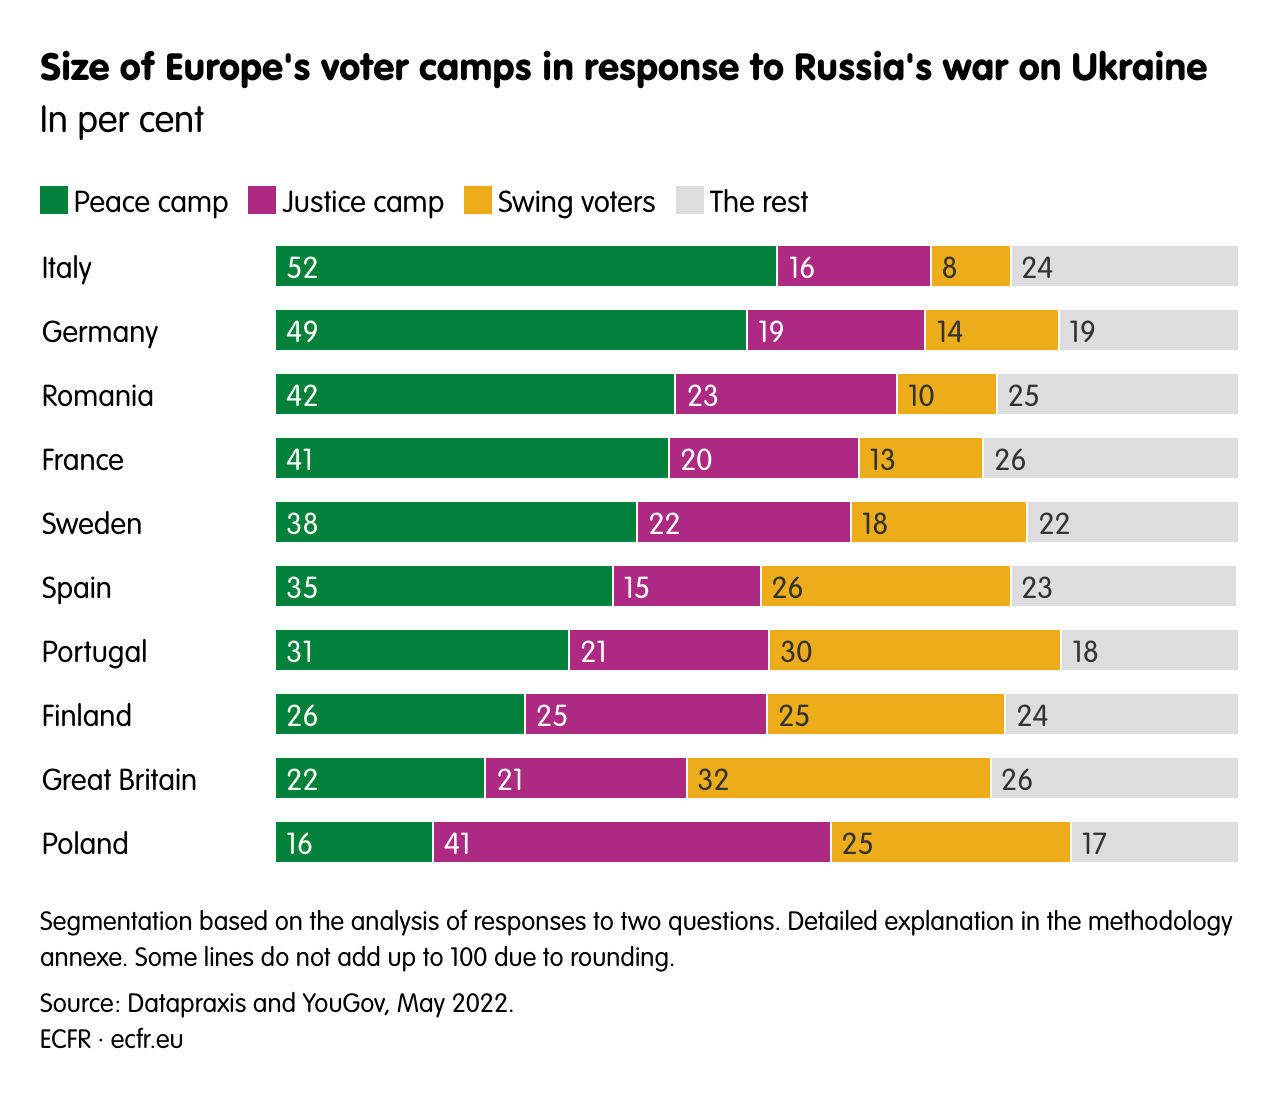 Size of Europe's voter camps in response to Russia's war on Ukraine